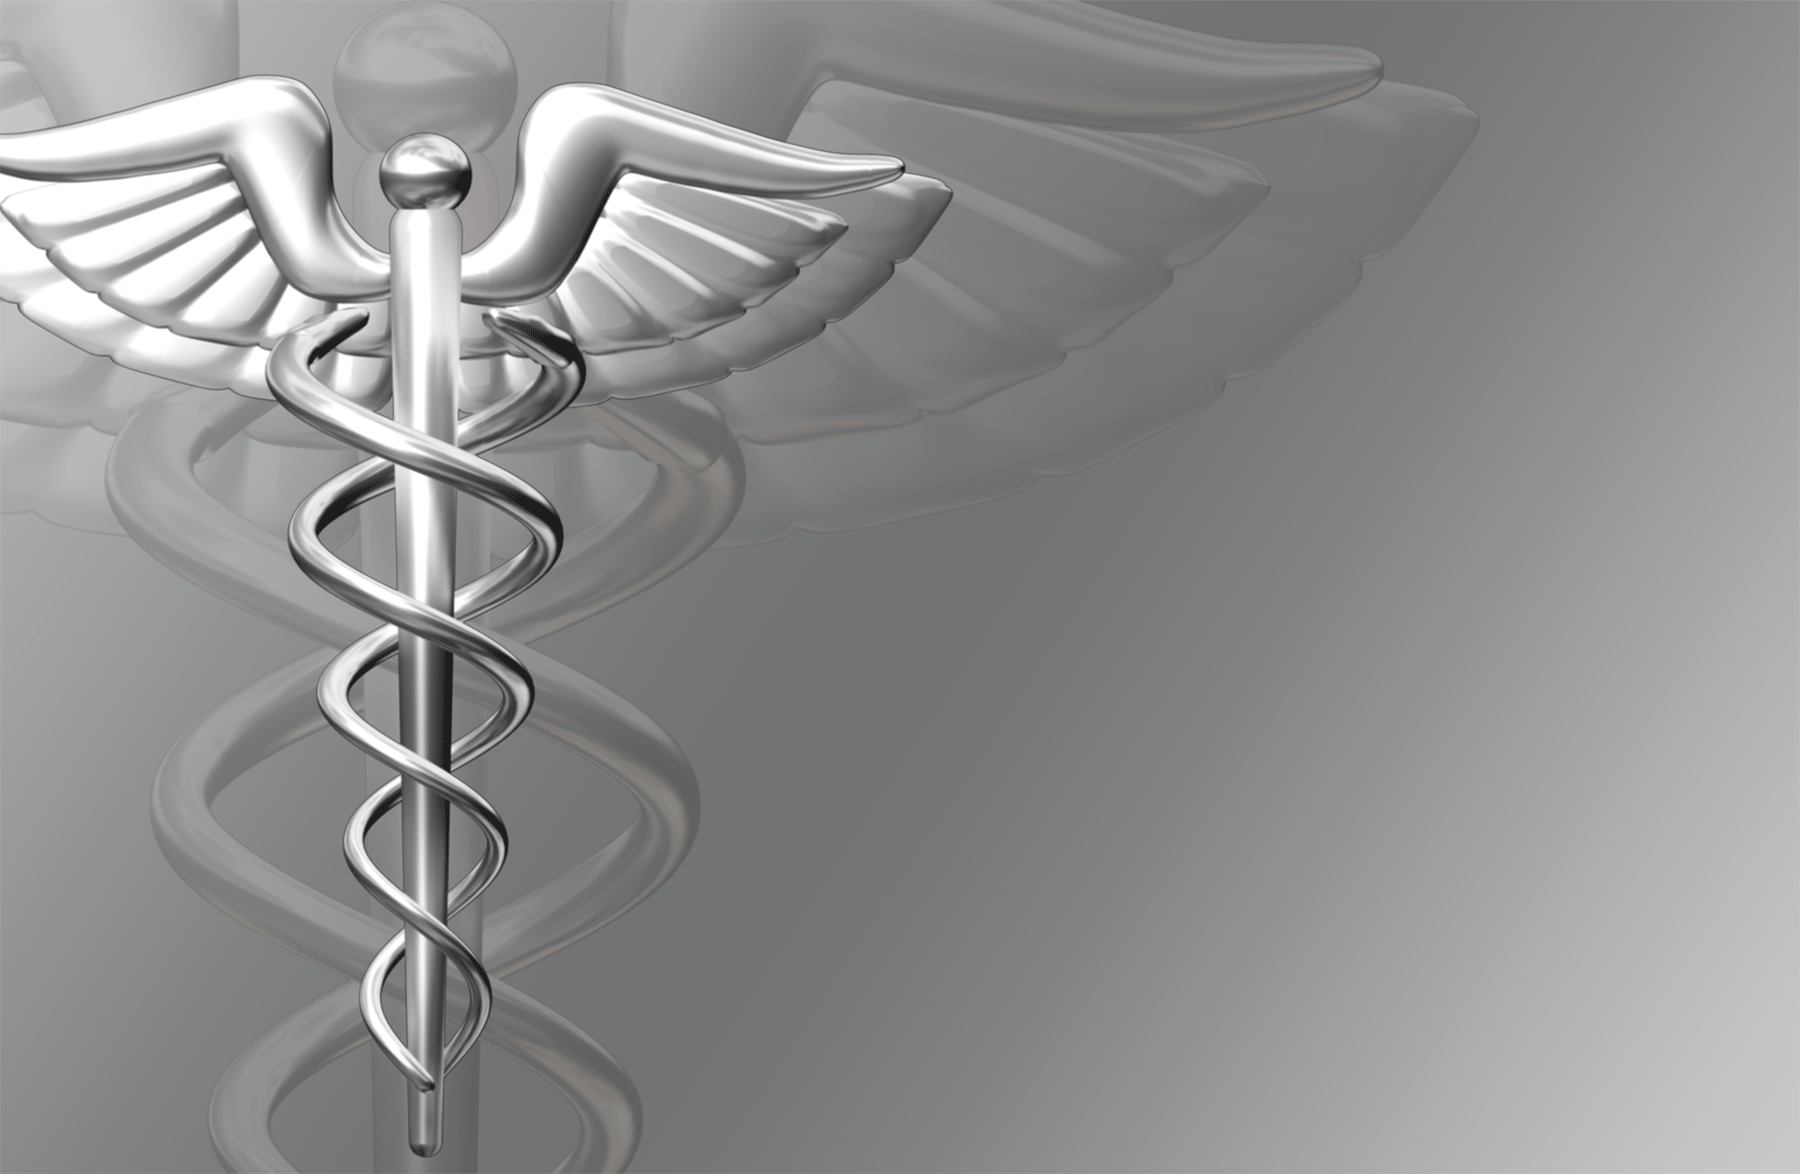 Medical Wallpaper Hd Images amp Pictures   Becuo